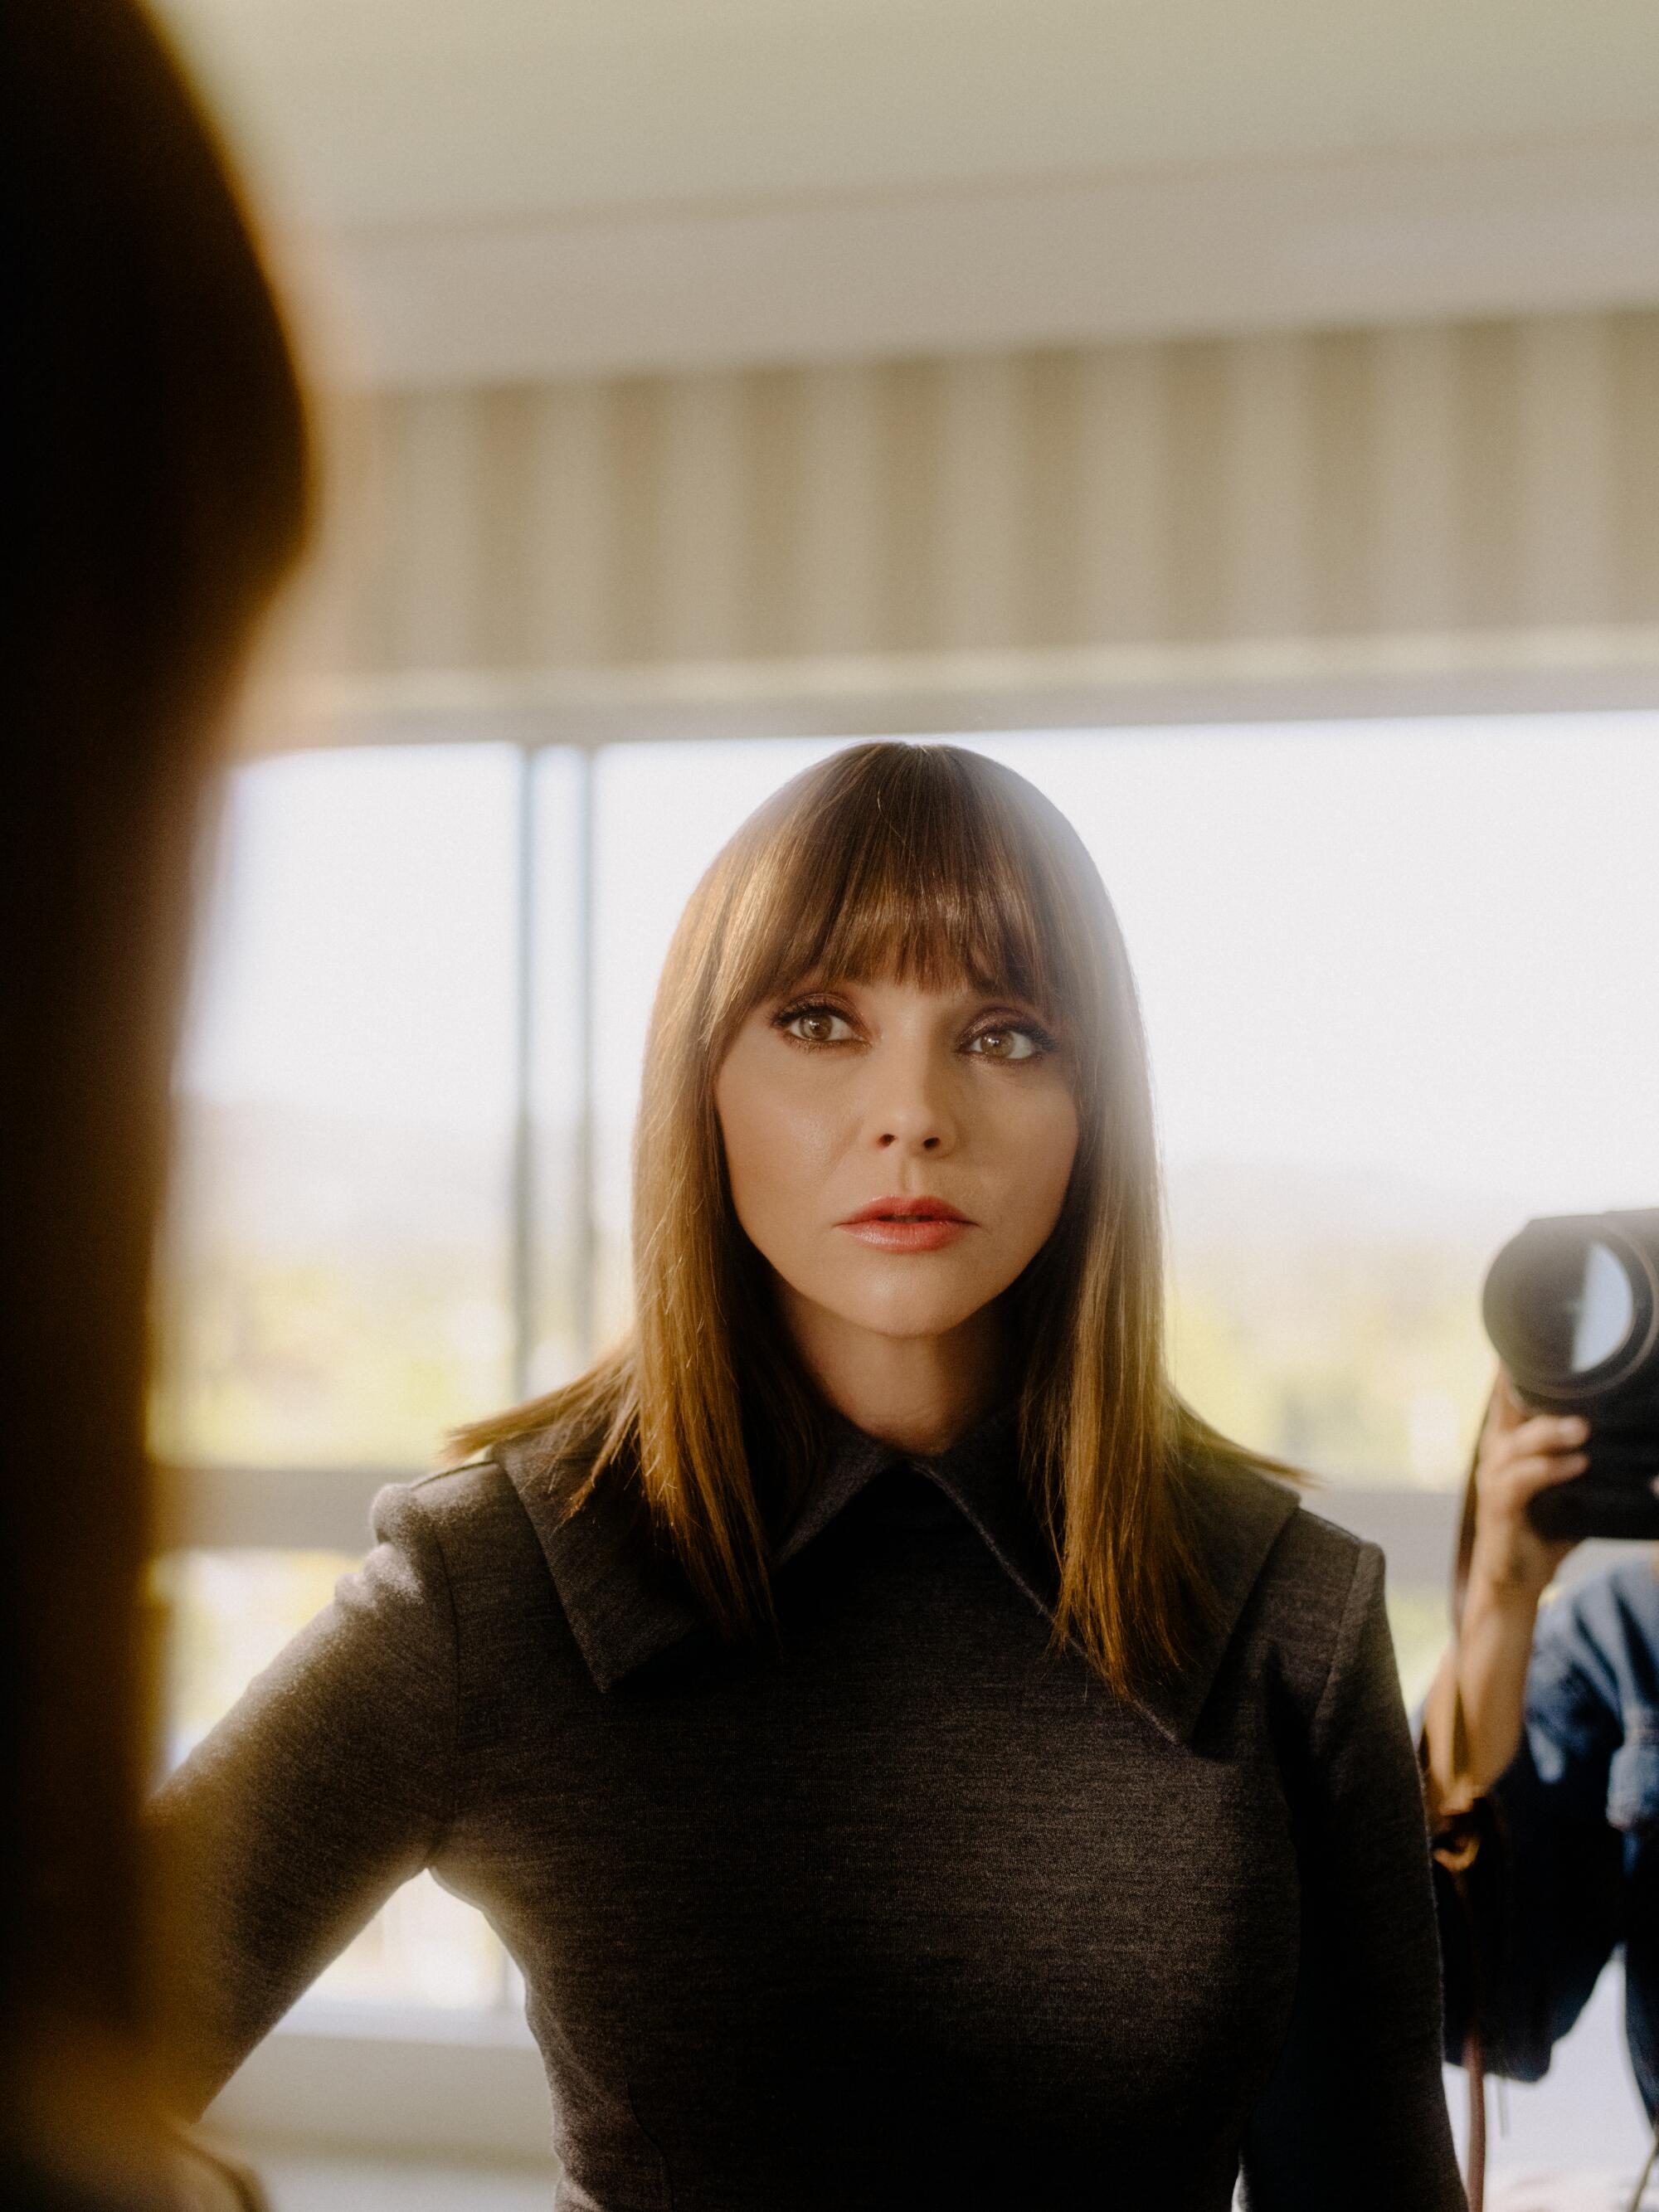 Christina Ricci looks in the mirror at her reflection at the Beverly Hilton.